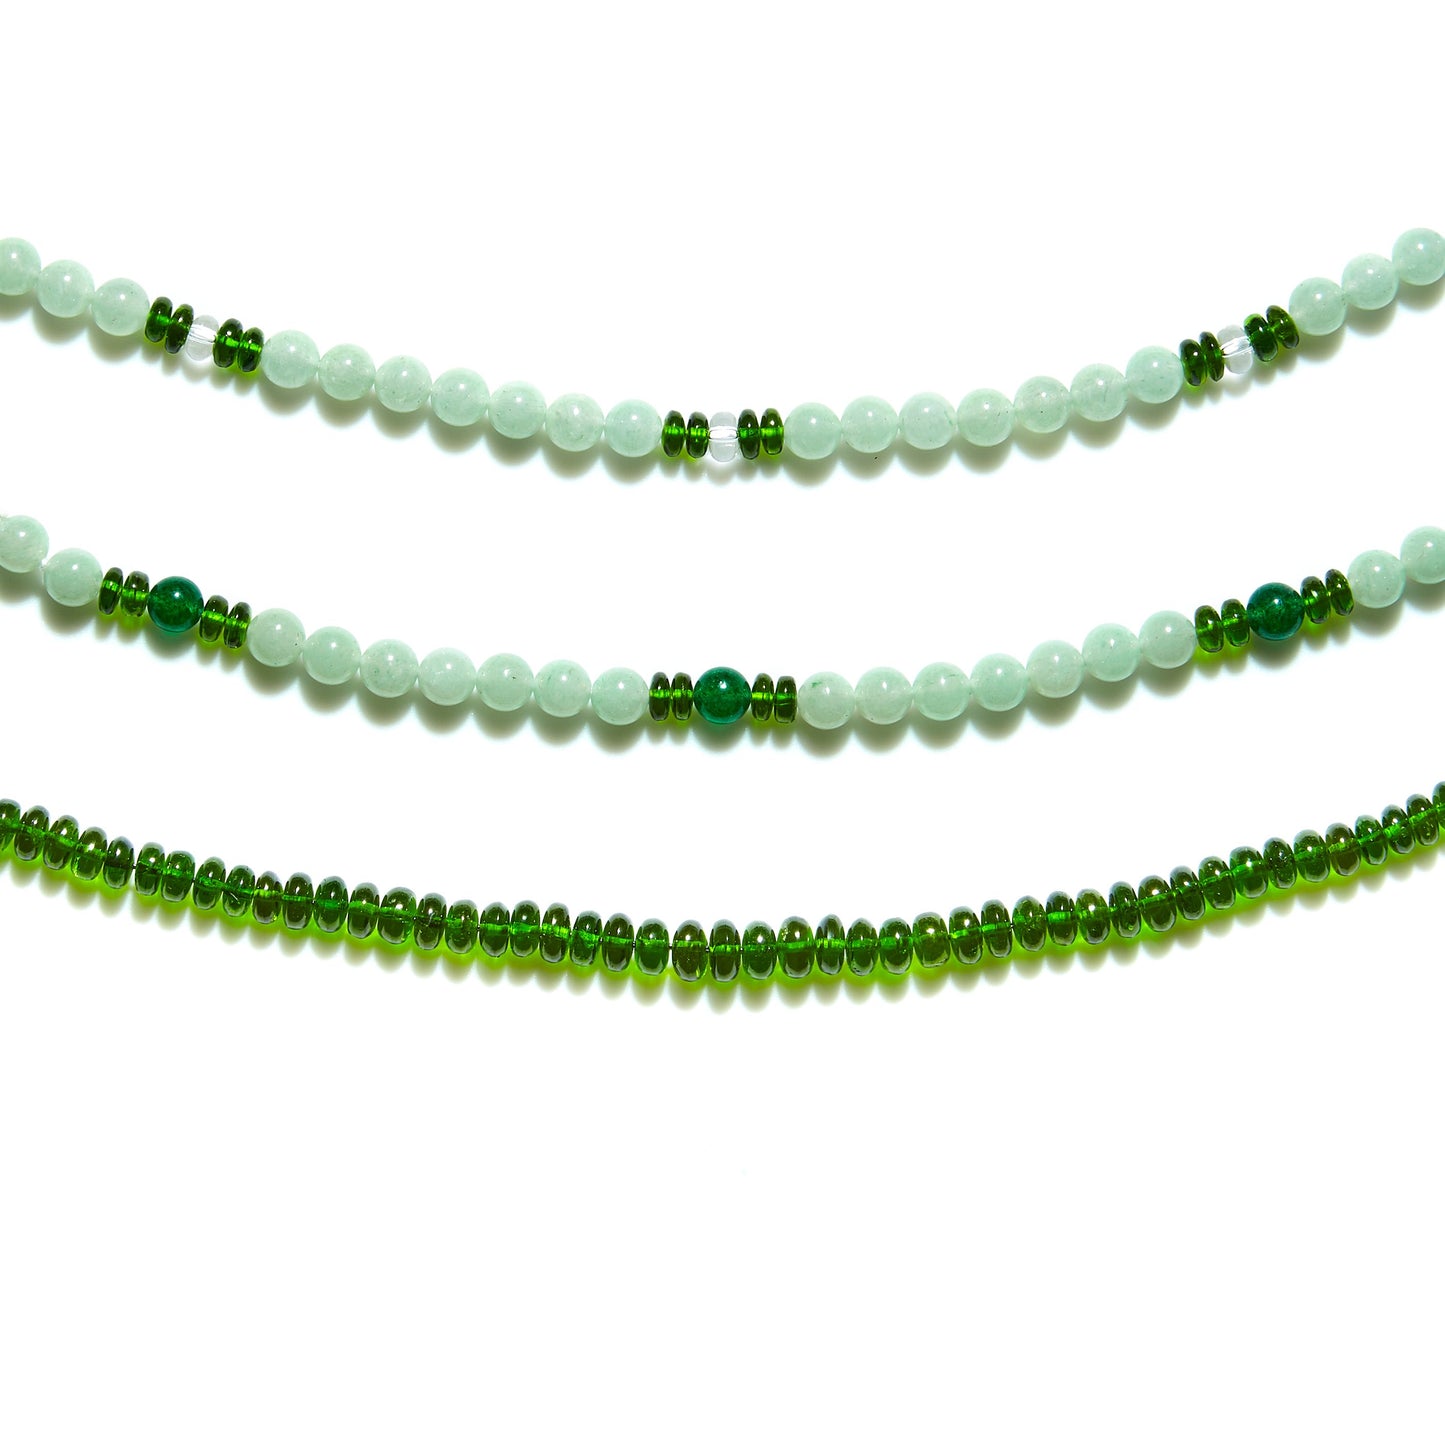 Set of three necklaces with Chrome Diopside focusing on physical healing